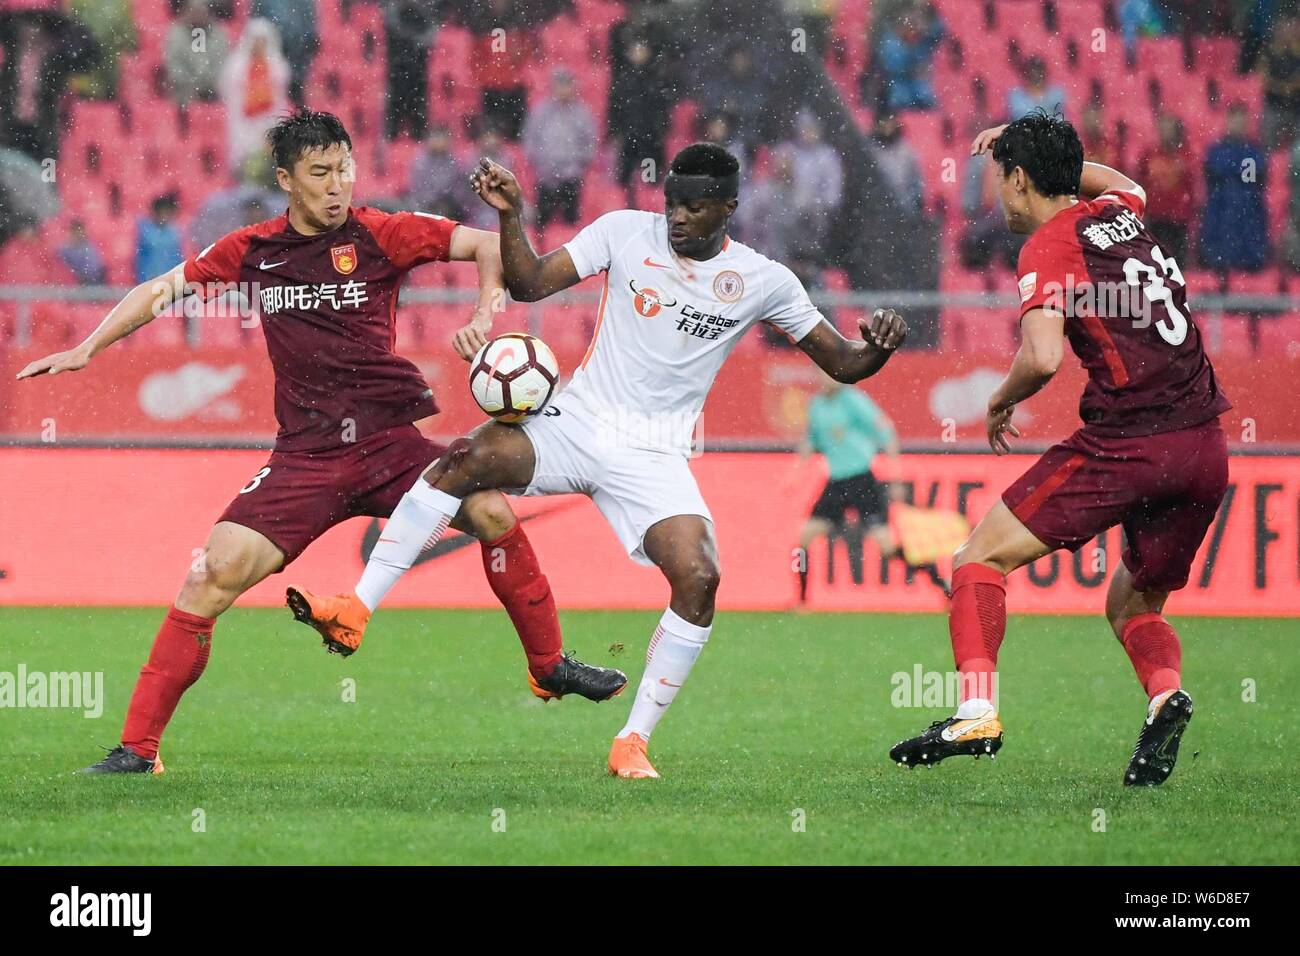 Cameroonian football player Benjamin Moukandjo, center, of Beijing Renhe kicks the ball to make a pass against players of Hebei China Fortune in their Stock Photo